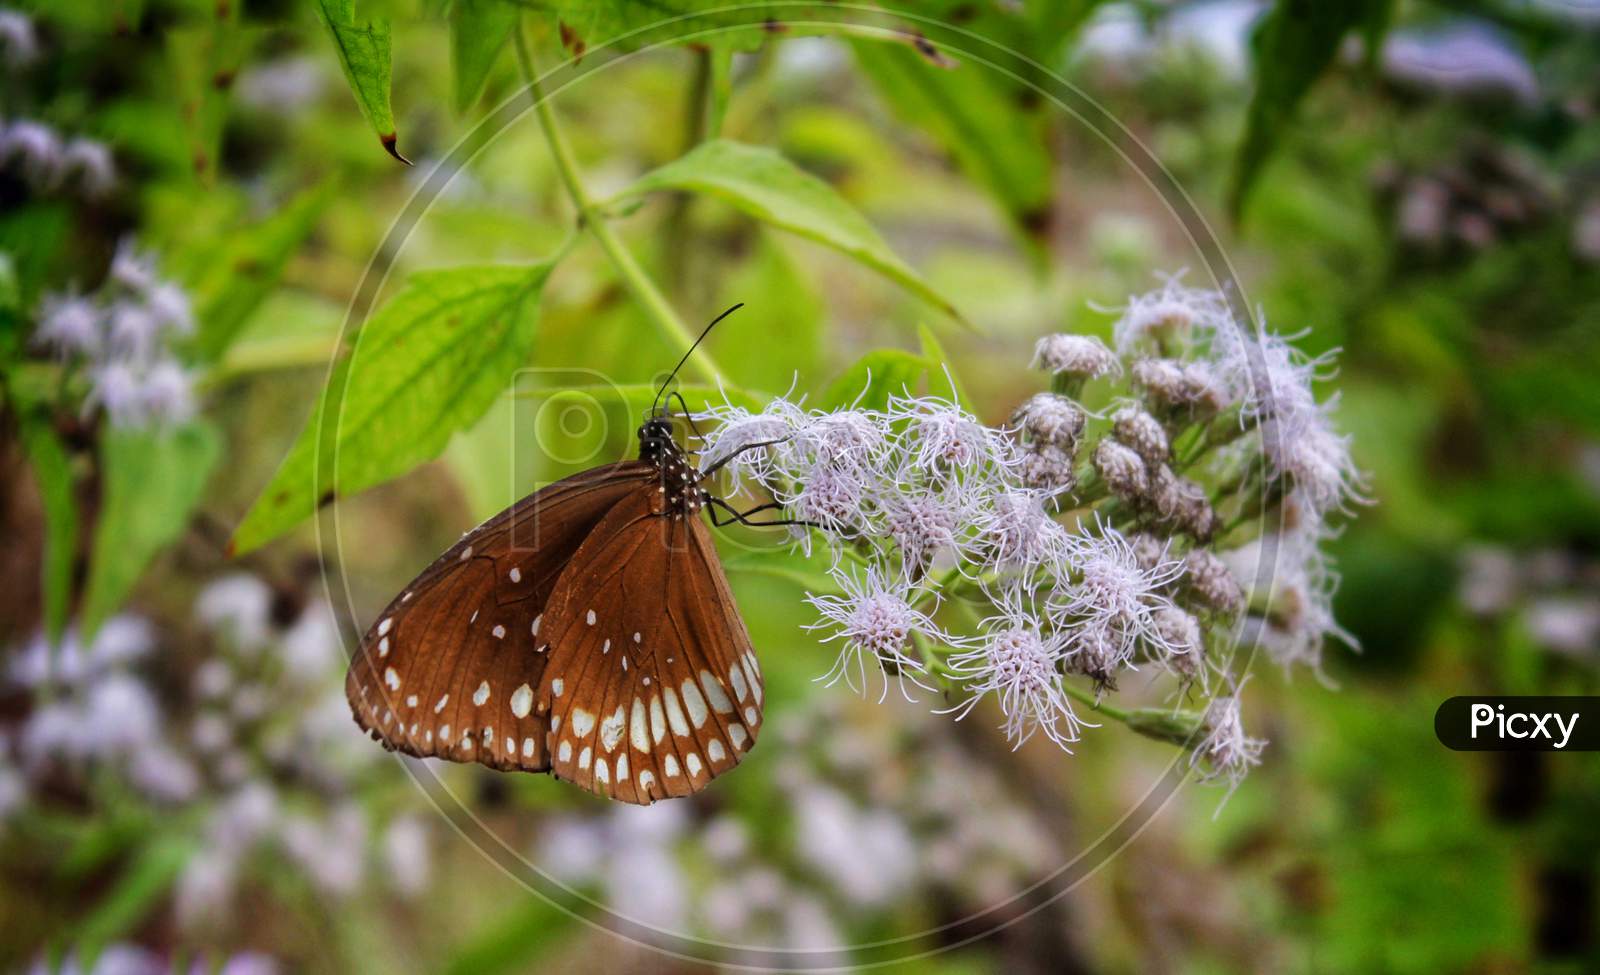 Brown butterfly sucking nectar from the flower